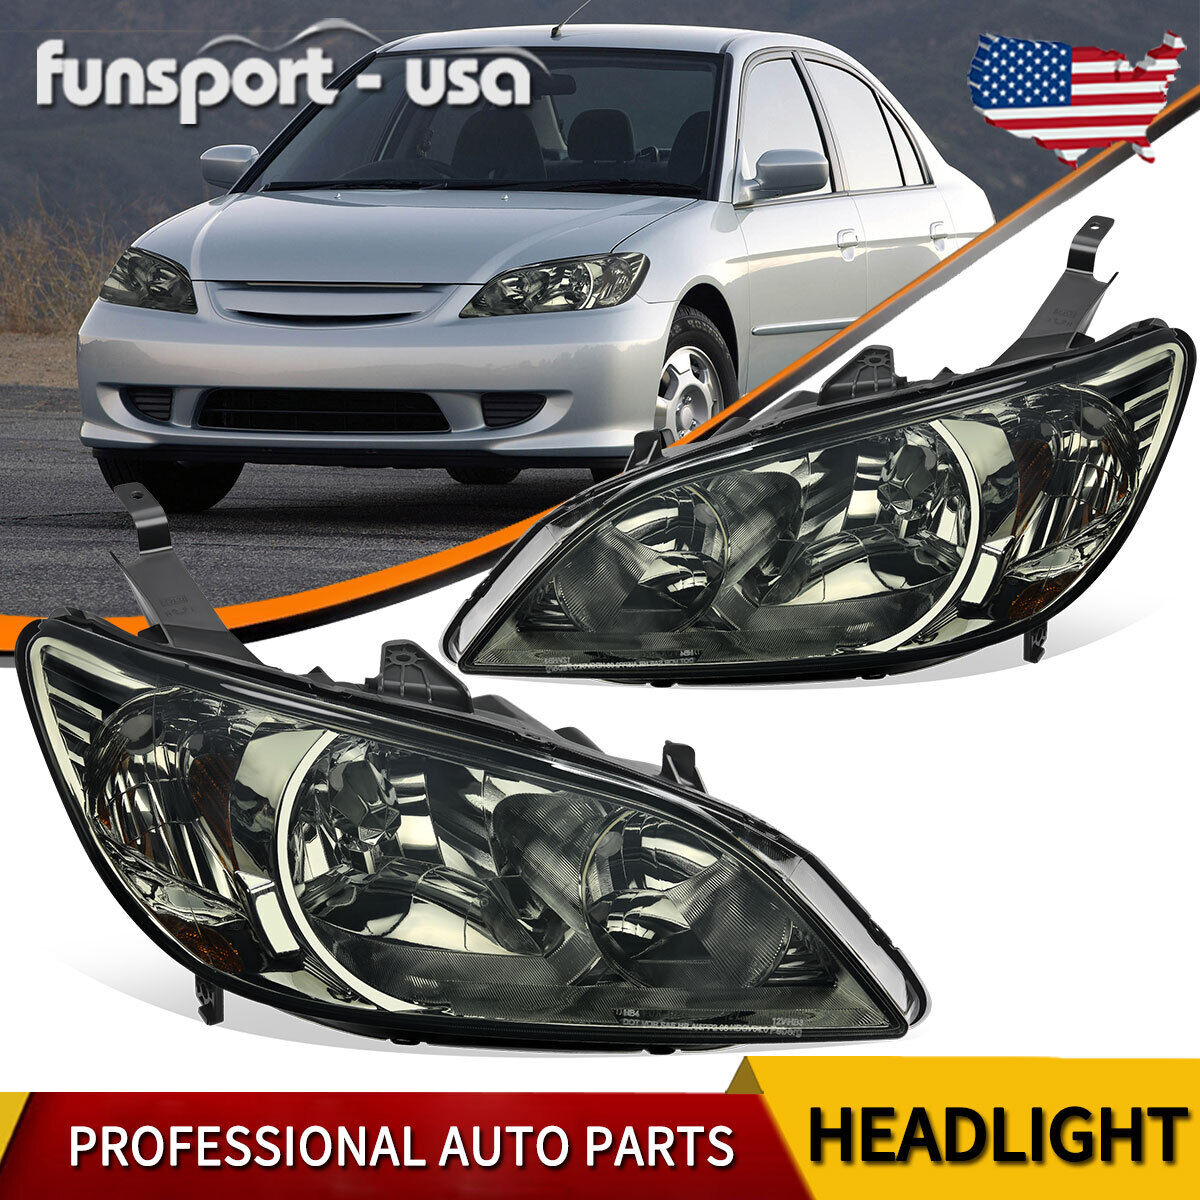 Headlights Assembly for 2004 2005 Honda Civic 2Dr/4Dr Black Headlamps Left+Right